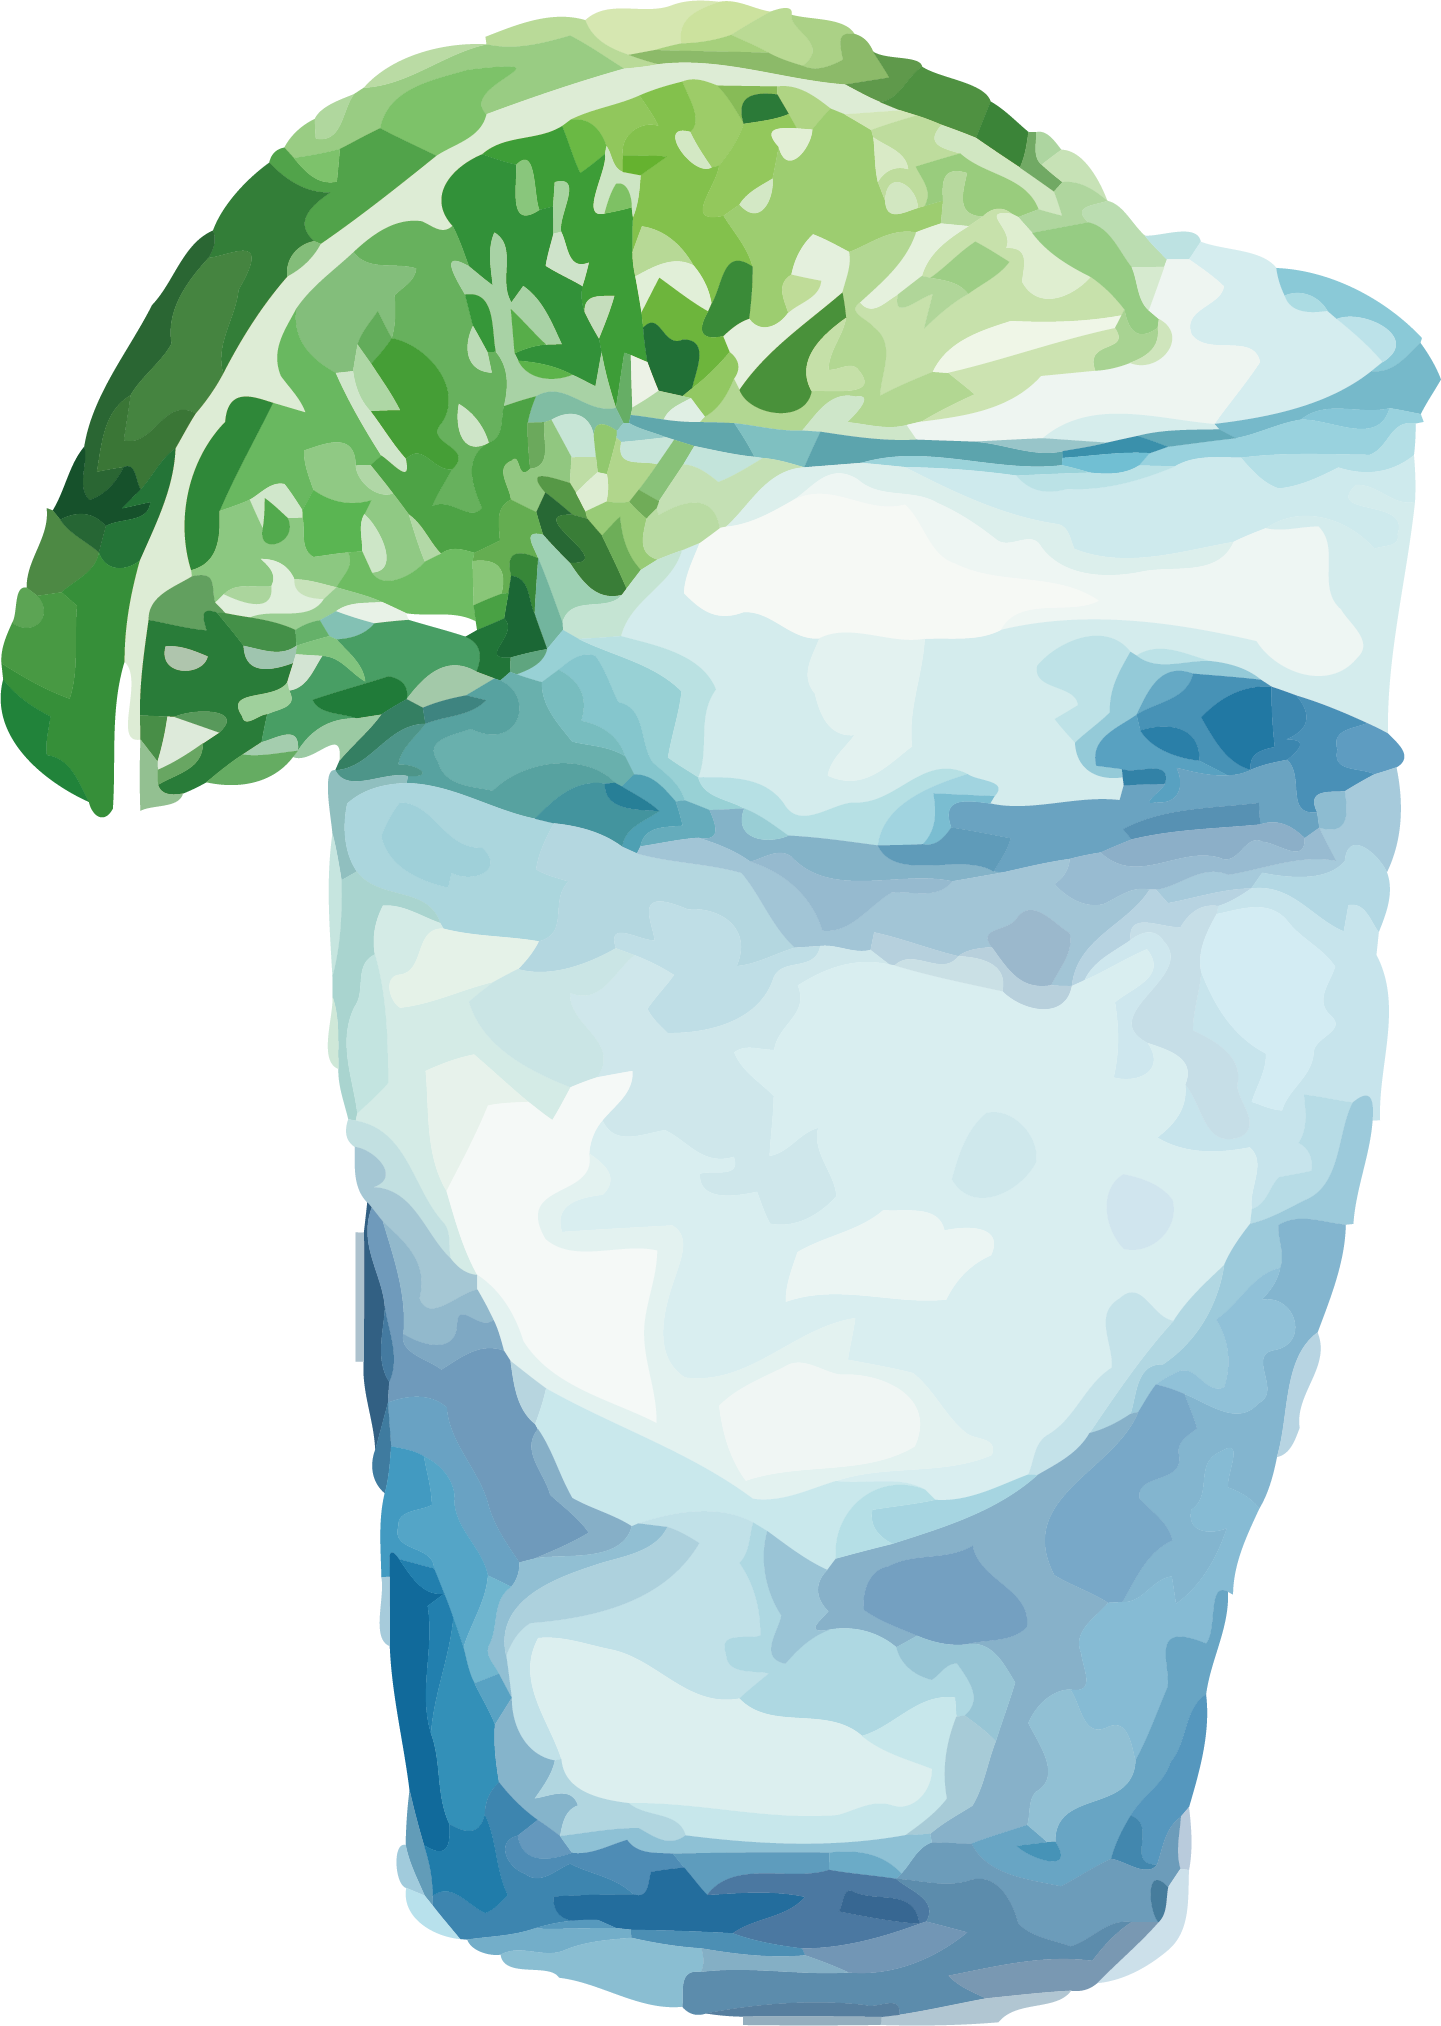 Glassof Waterwith Lime Vector Illustration